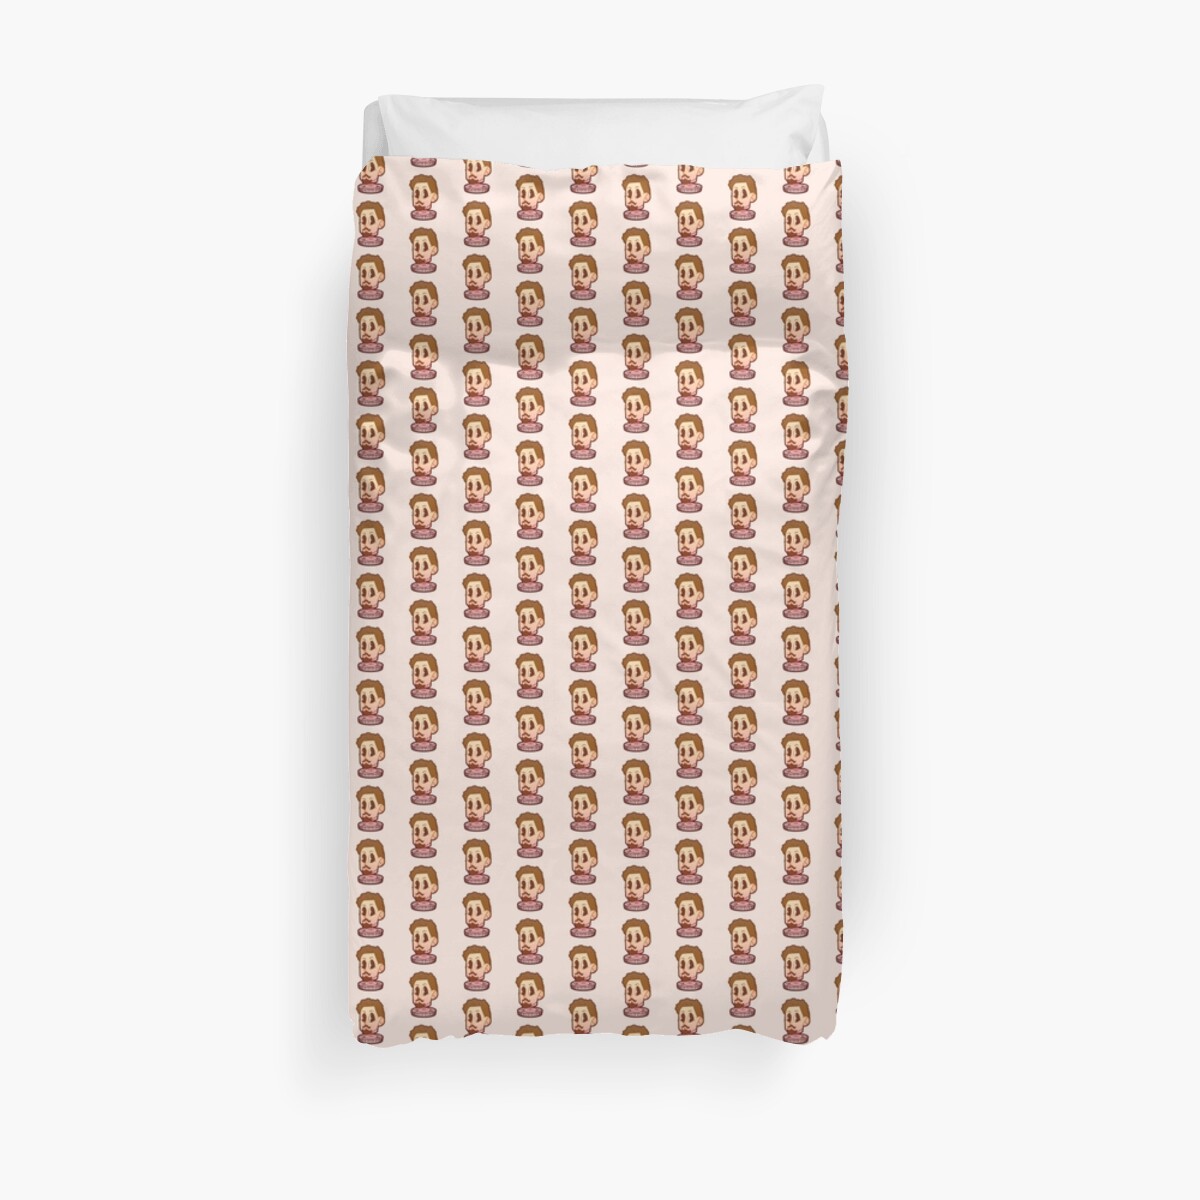 "BBC Ghosts - Humphrey" Duvet Cover by ForDomaa | Redbubble